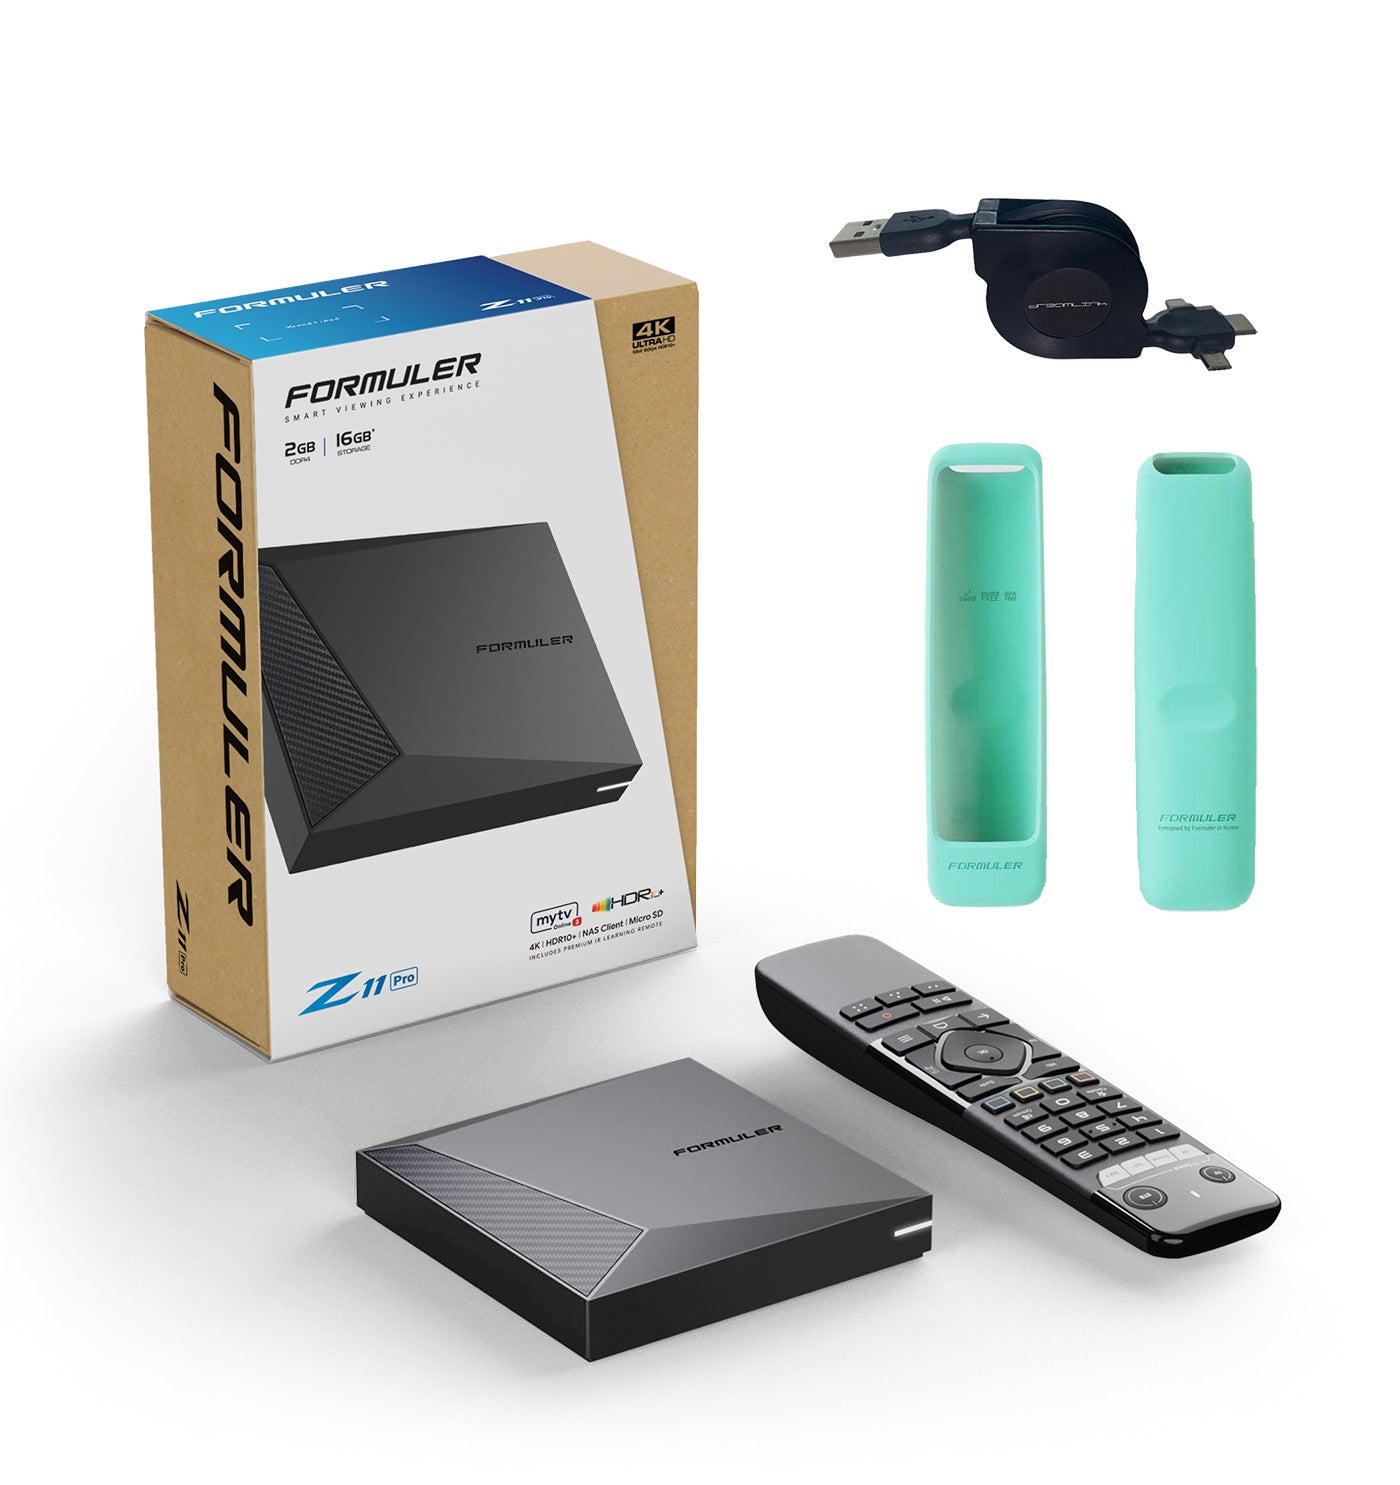 Formuler Z11 Pro + FREE ACCESSORY: 1x Turquoise Remote Cover + 1x Retractable USB cable